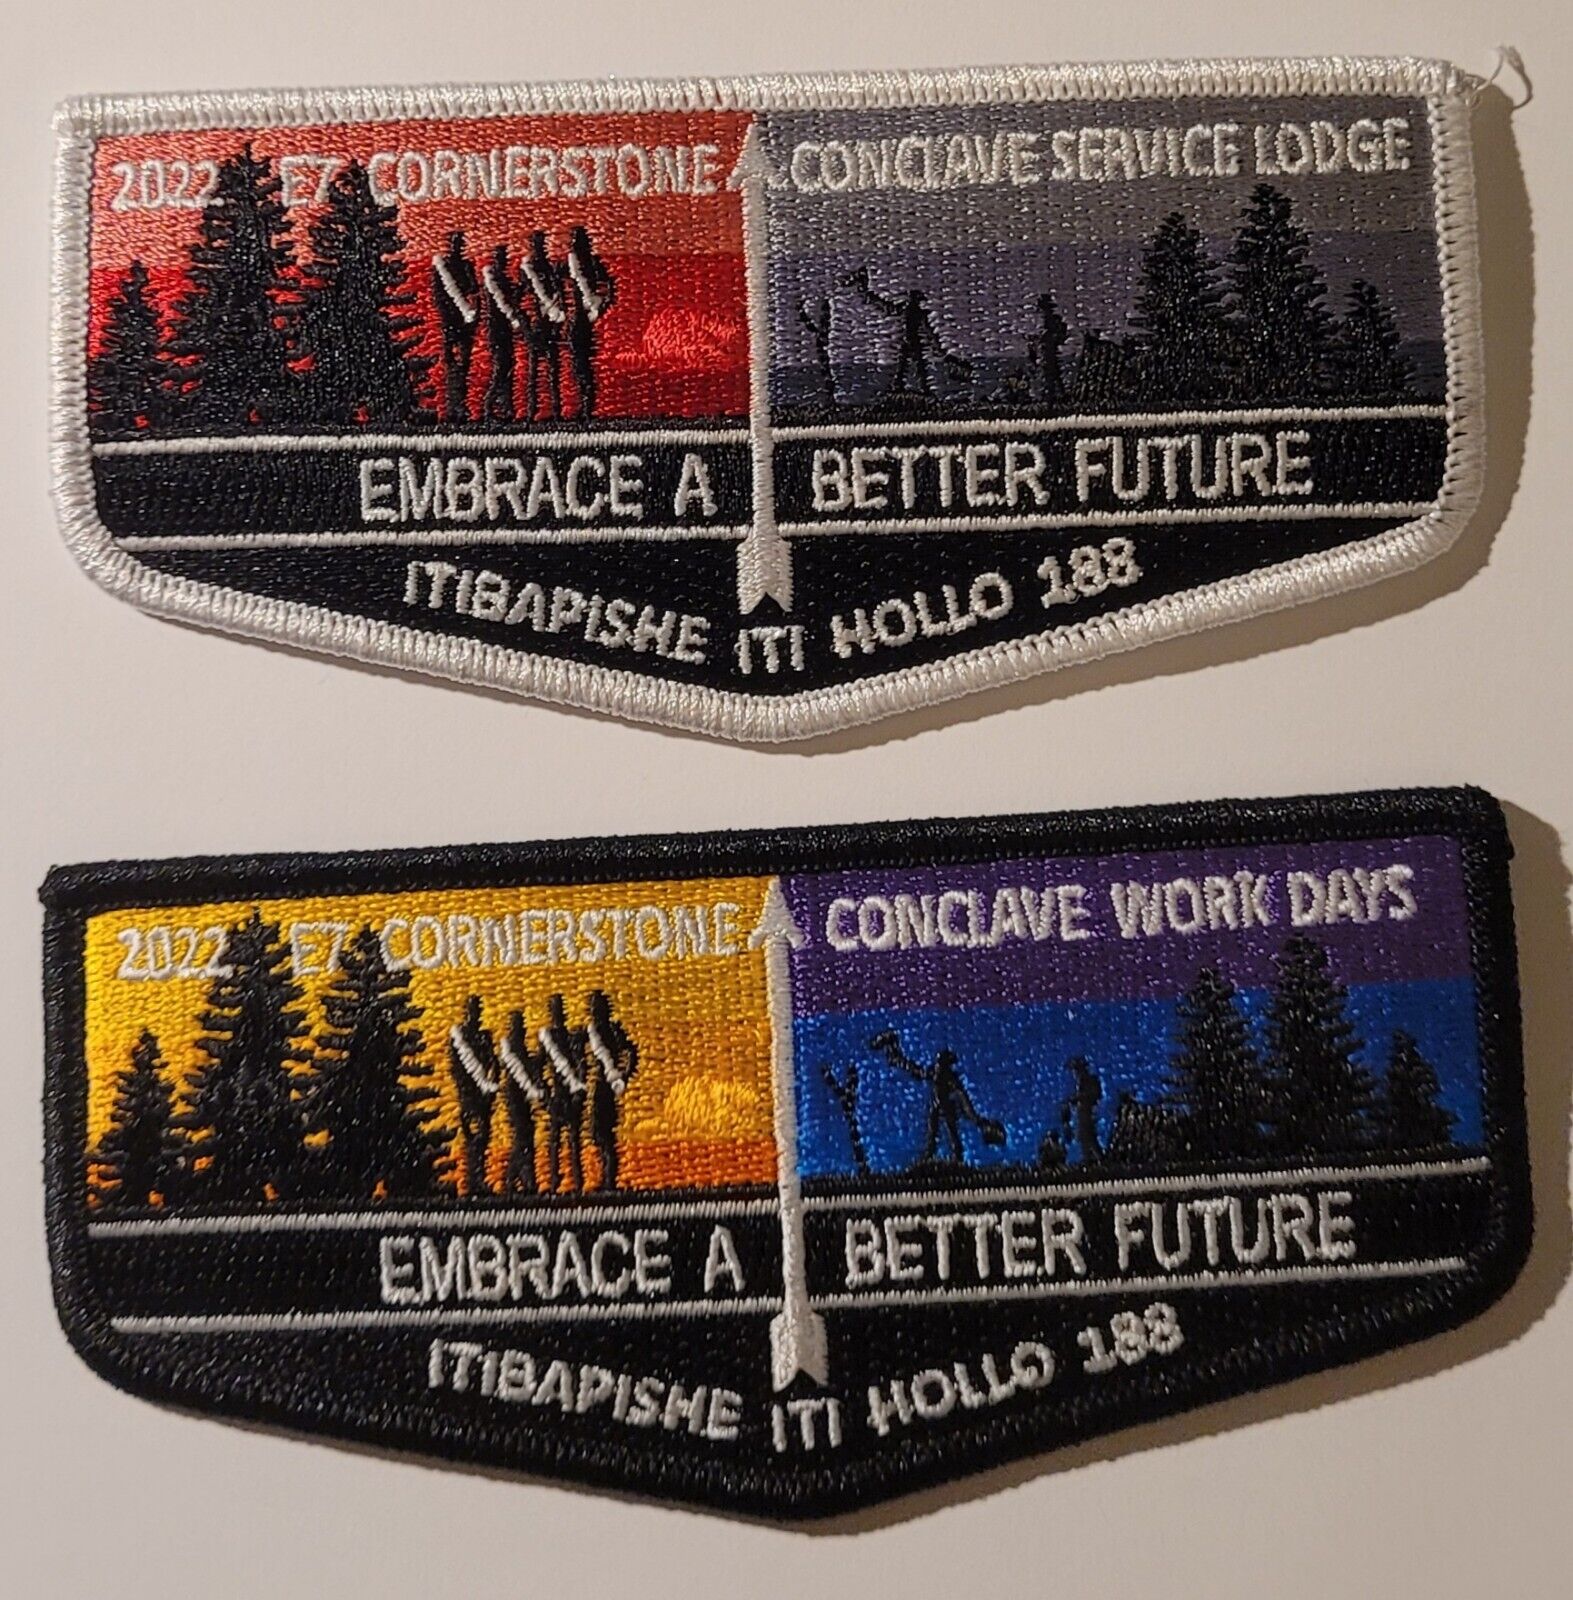 2022 Cornerstone Conclave Work Days And Service Lodge Flaps Issued By Itibapishe